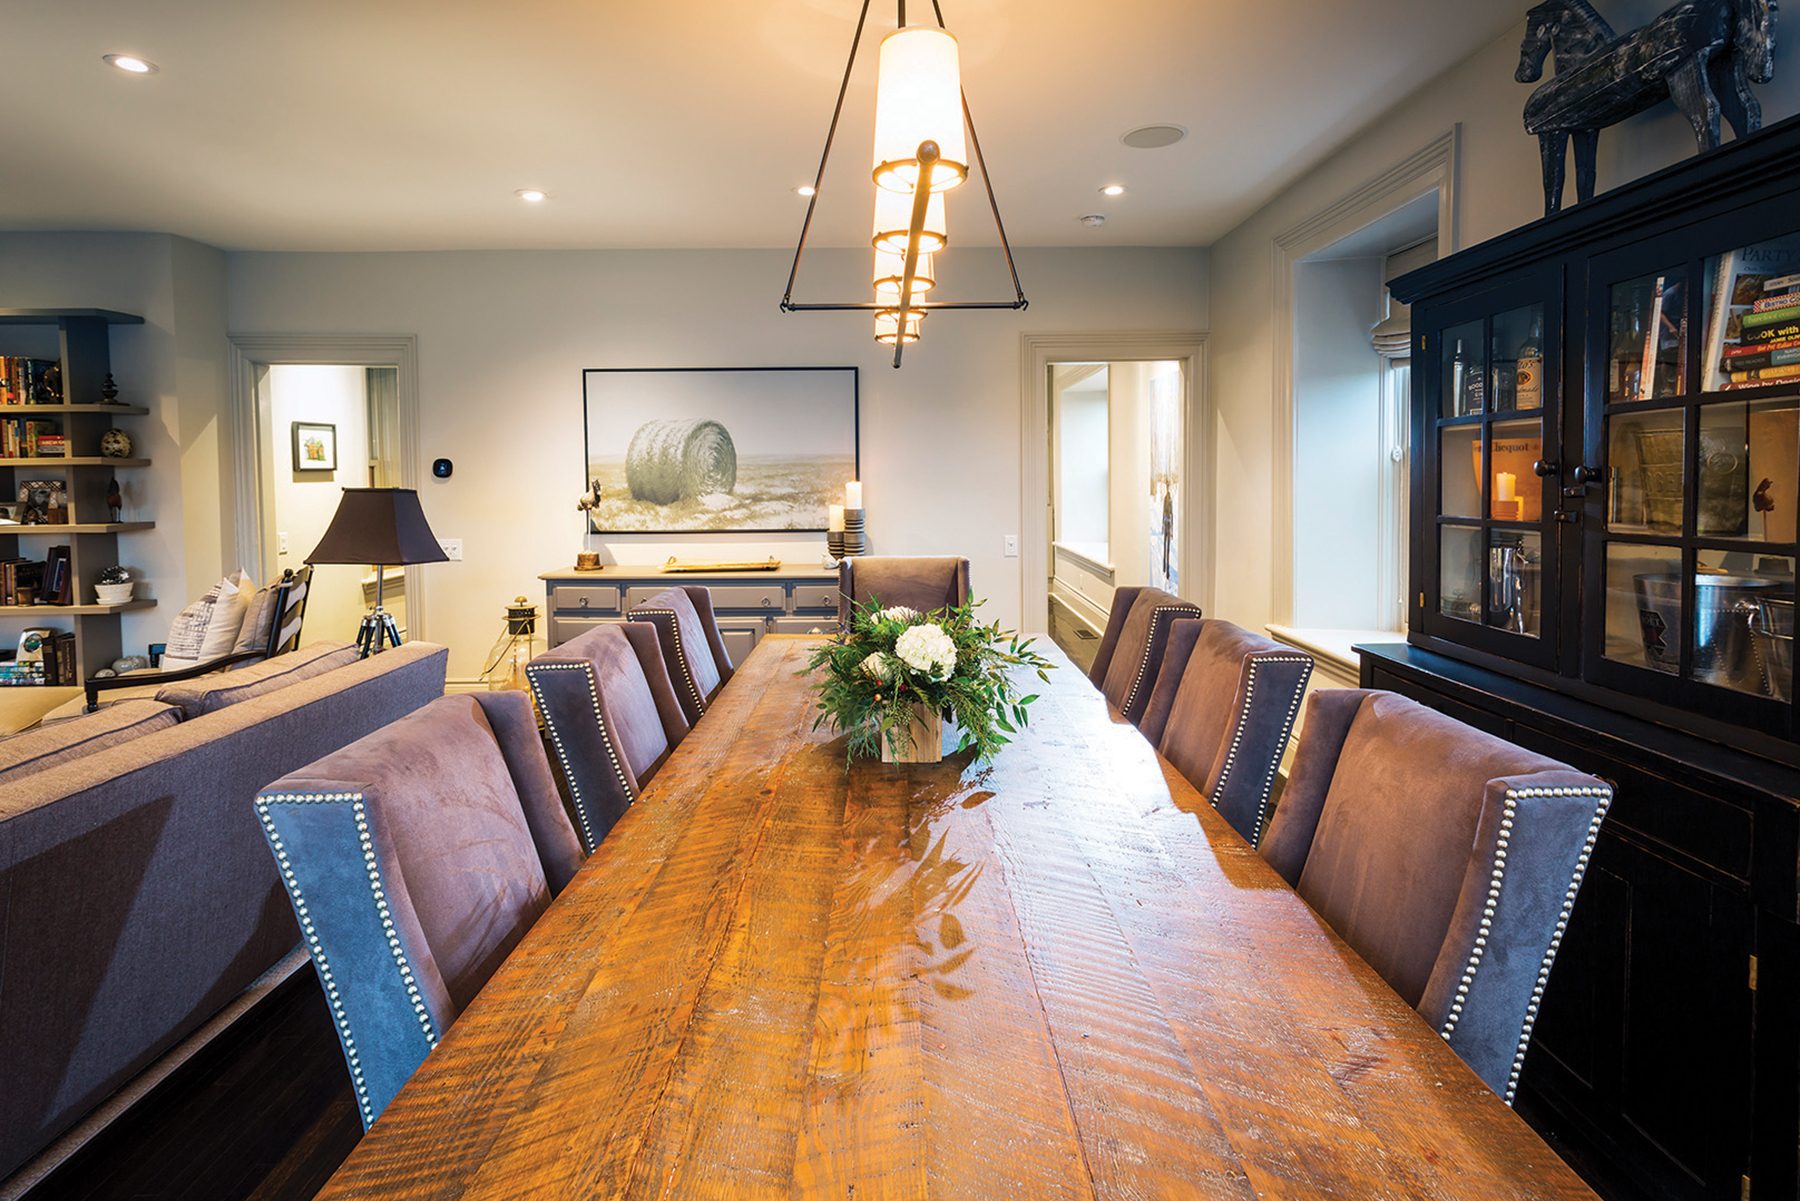 The reclaimed hemlock dining table can seat 12. Maxwell designed the black iron and glass light fixture.